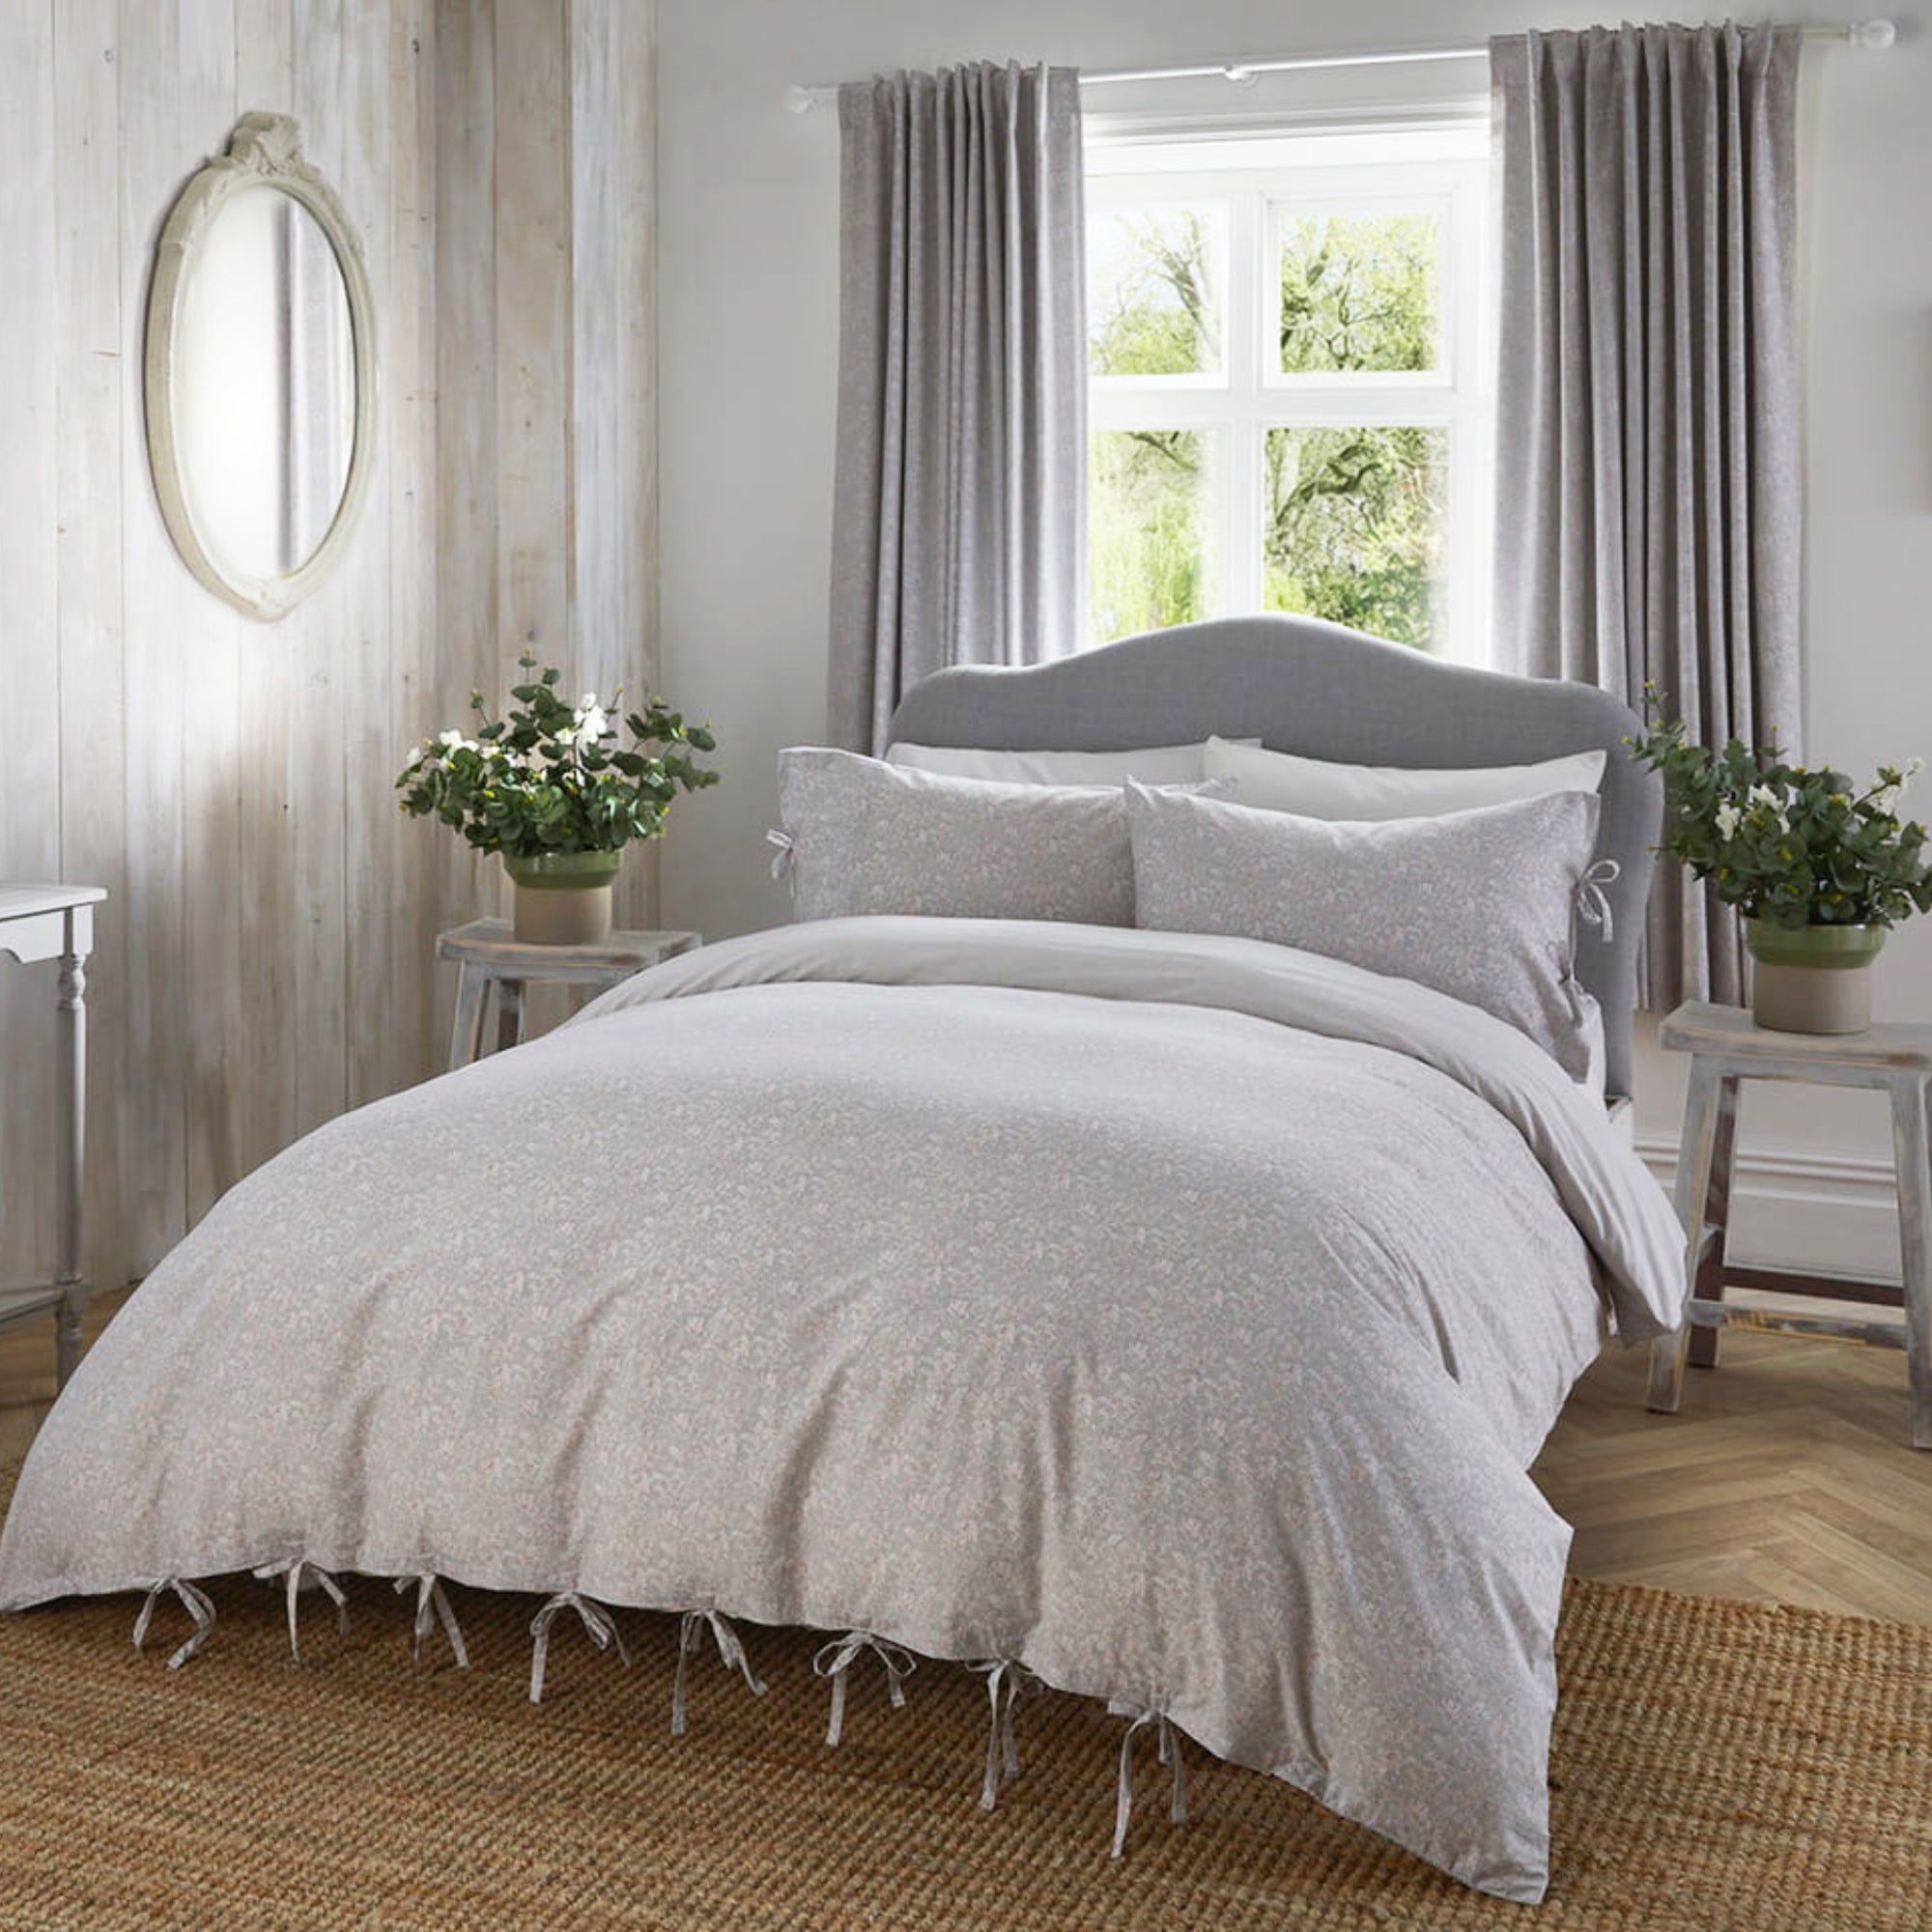 Duvet Cover Set Roselle by Appletree Promo in Grey